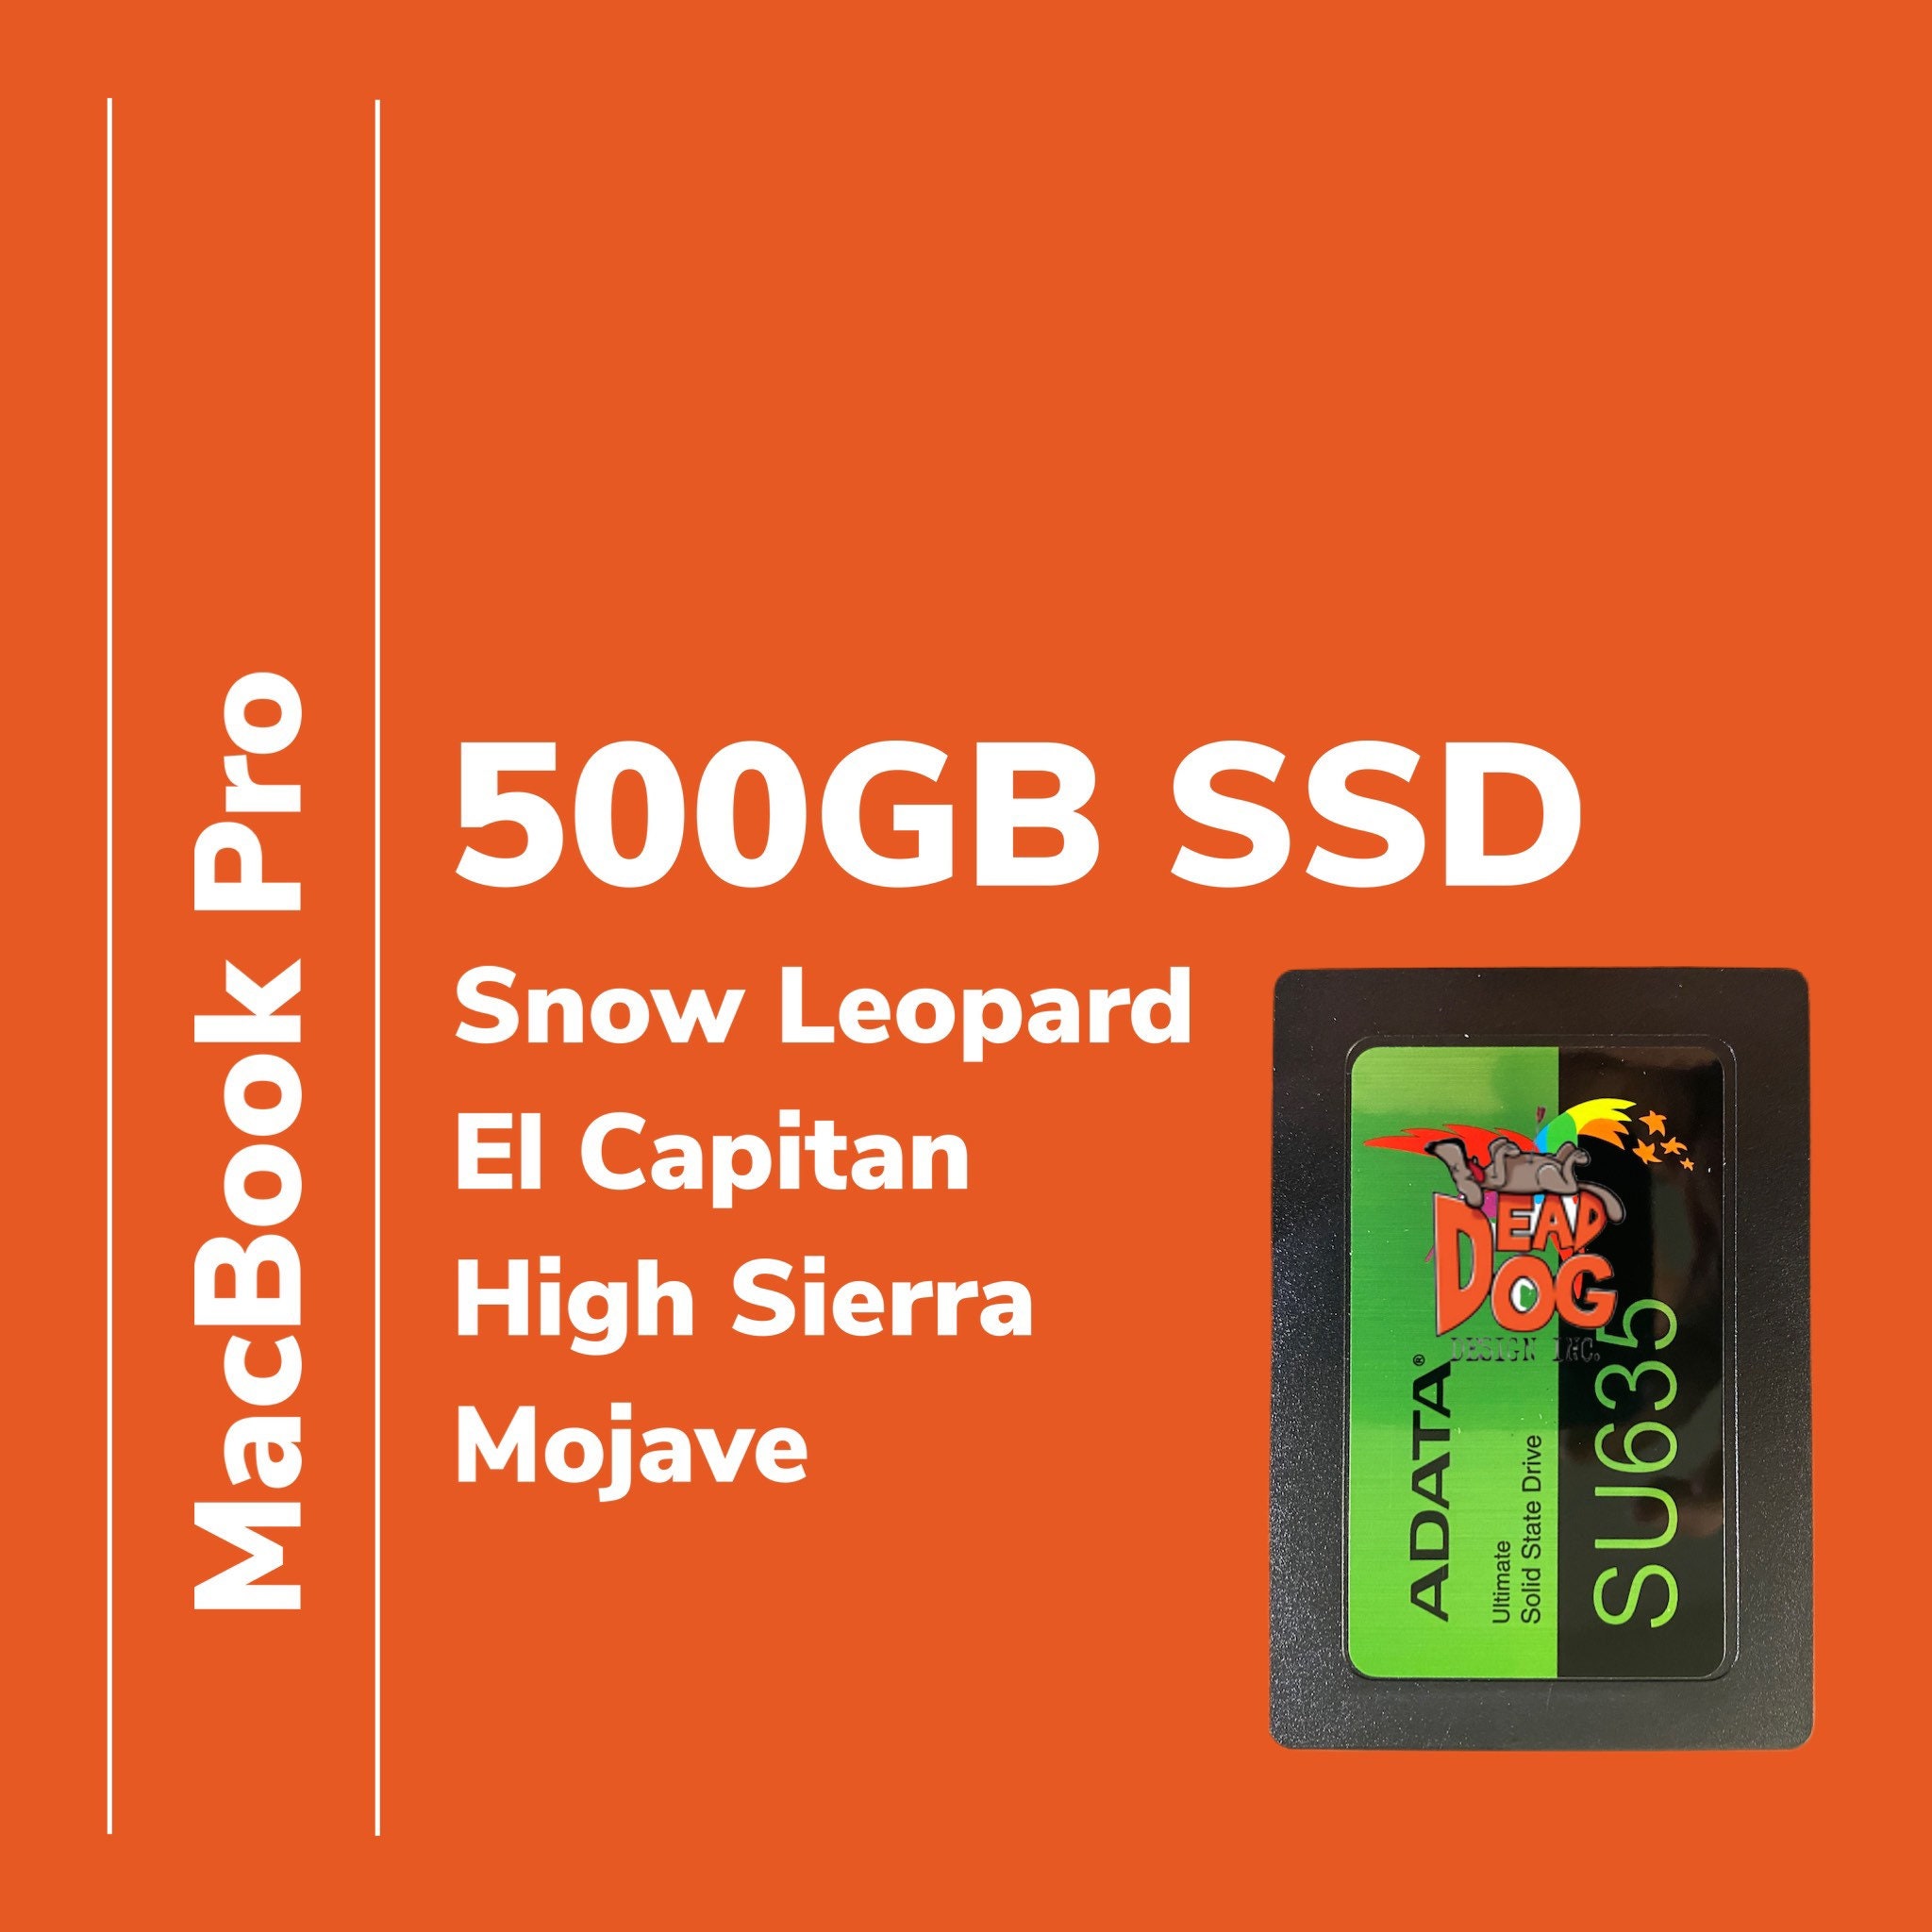 500GB SSD Hard Drive Preloaded With Mac OS for Macbook Pro - Etsy